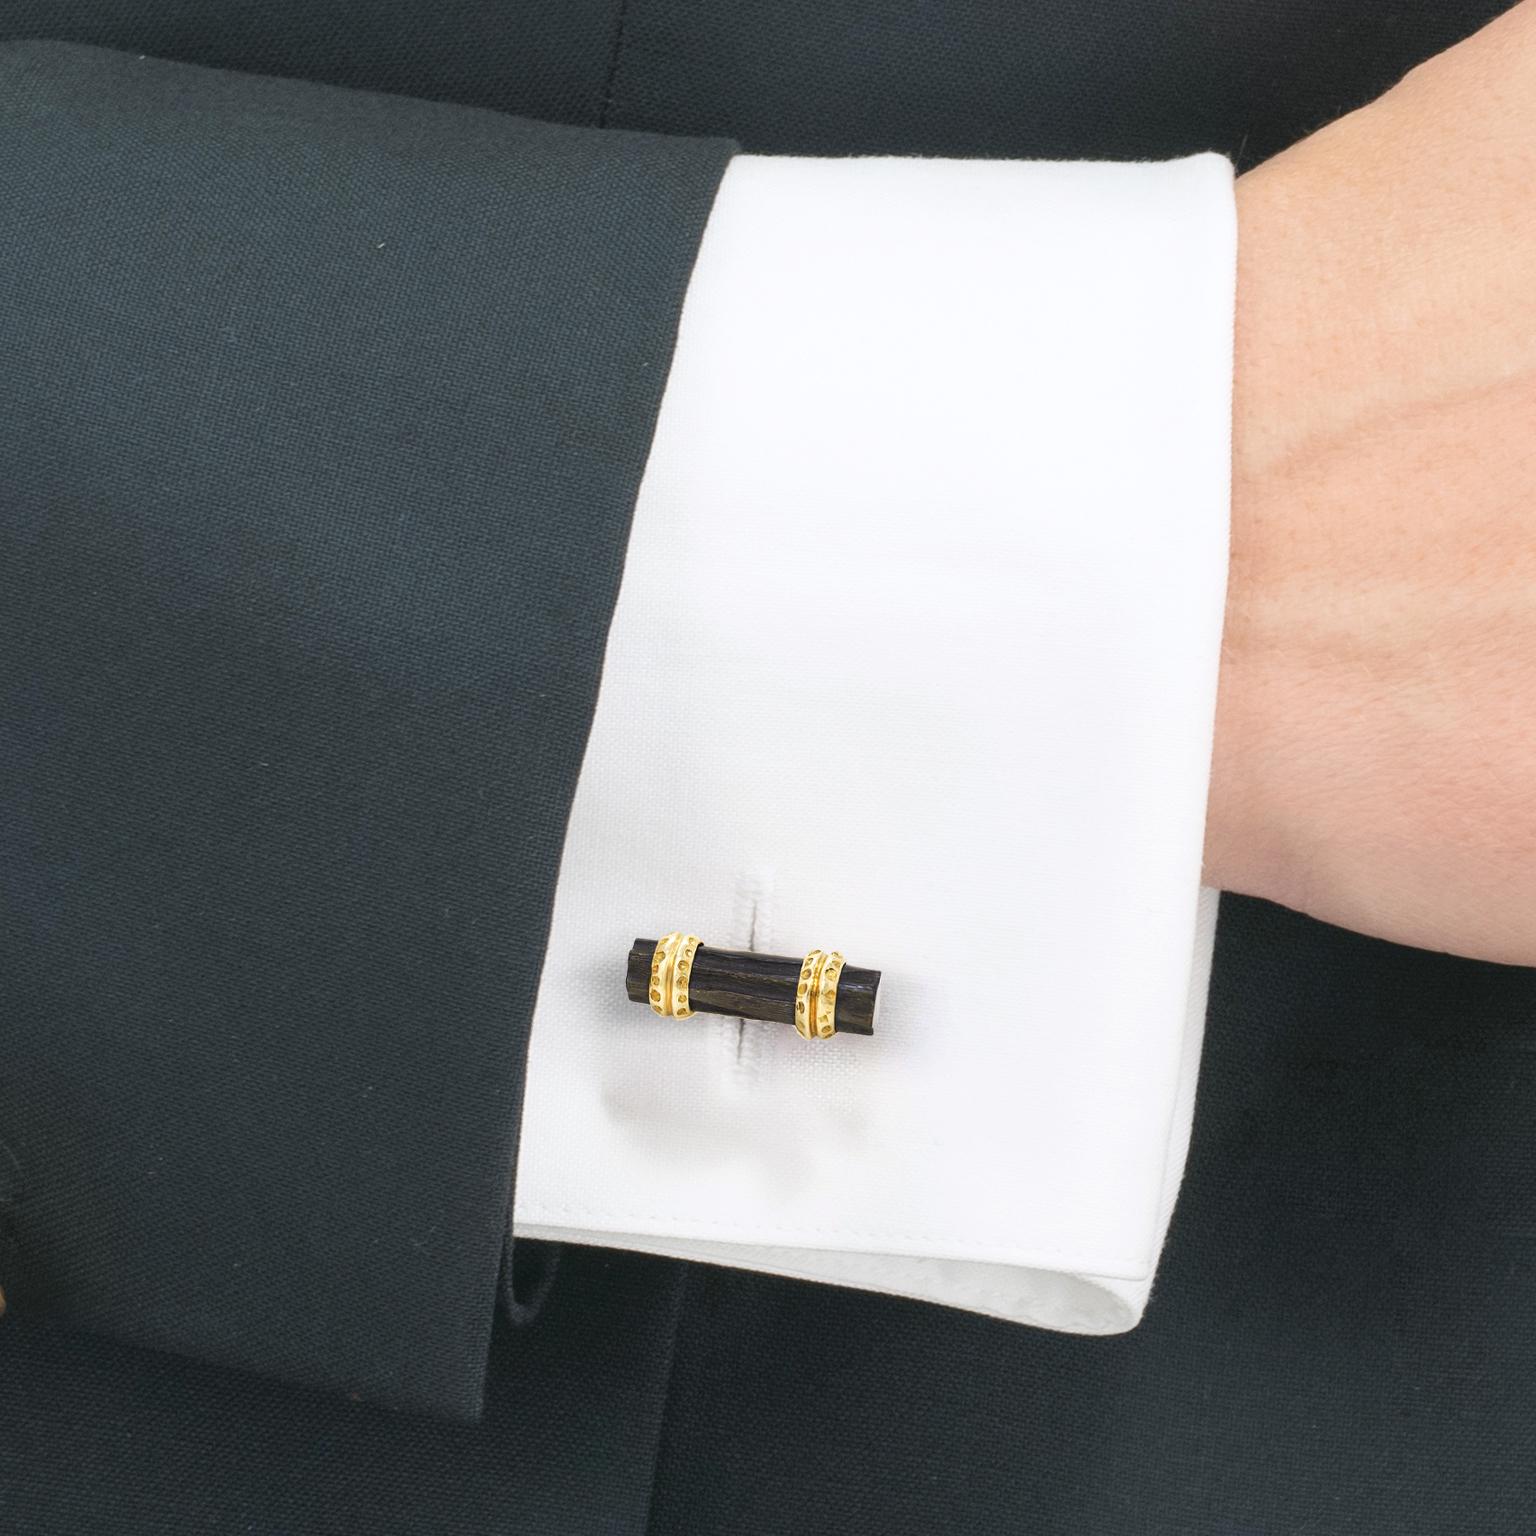 Circa 1960s 18k, by Van Cleef and Arpels, France.  VCA is known for stylishly elegant cufflinks ... Well, for stylishly elegant everything! Set with carved black coral in a brutalist motif, these urbane examples of their work are perfect for any